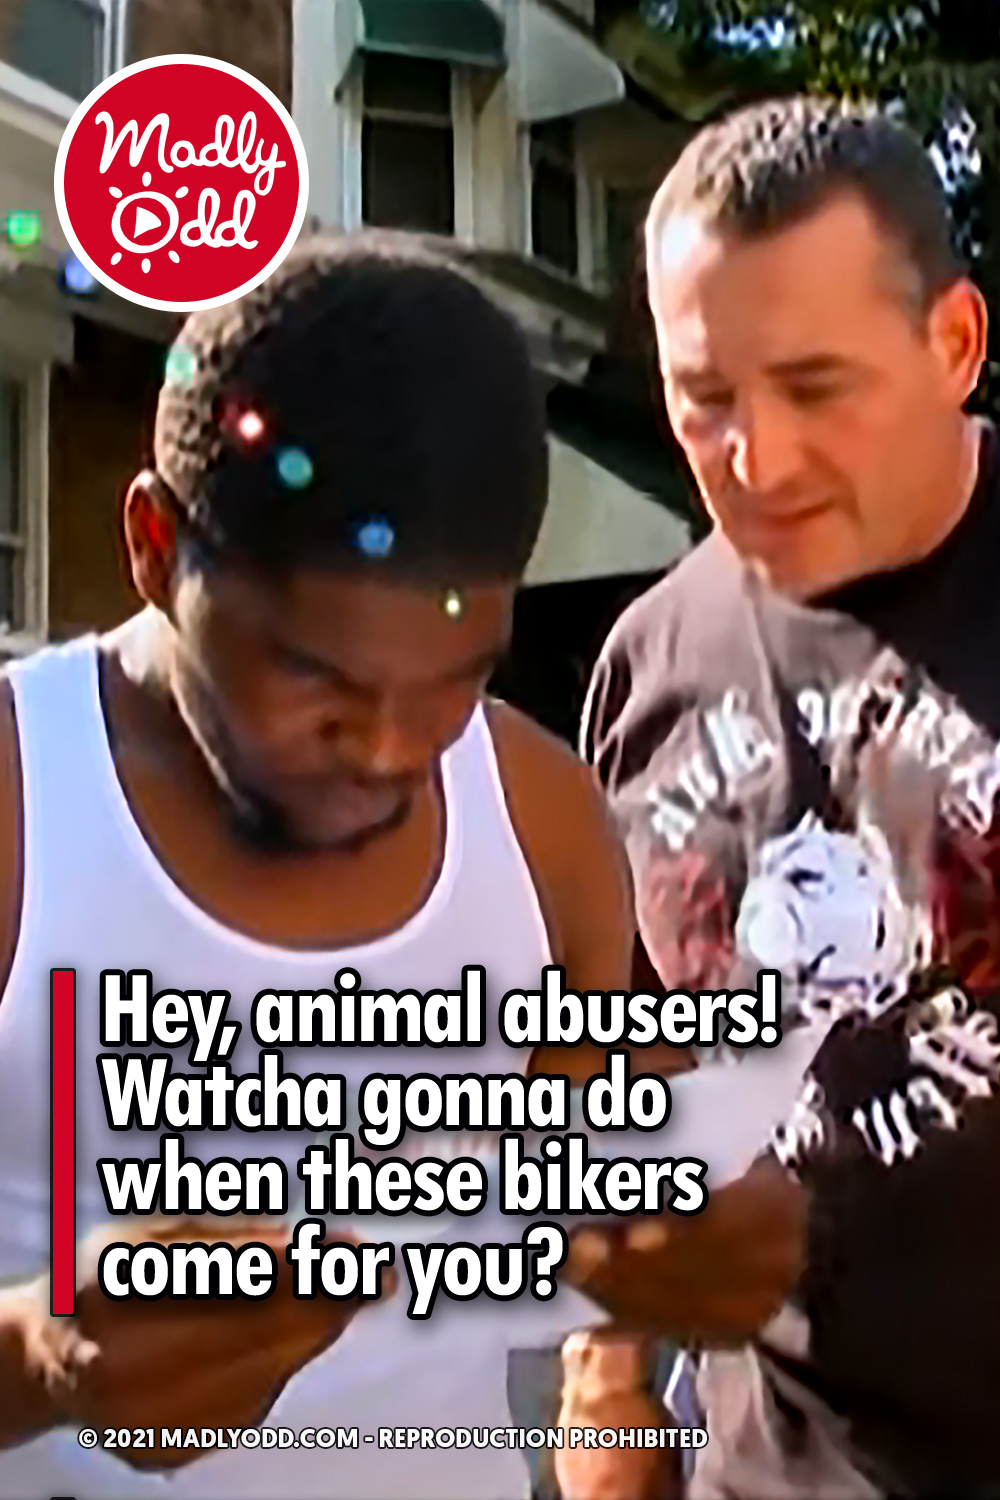 Hey, animal abusers! Watcha gonna do when these bikers come for you?